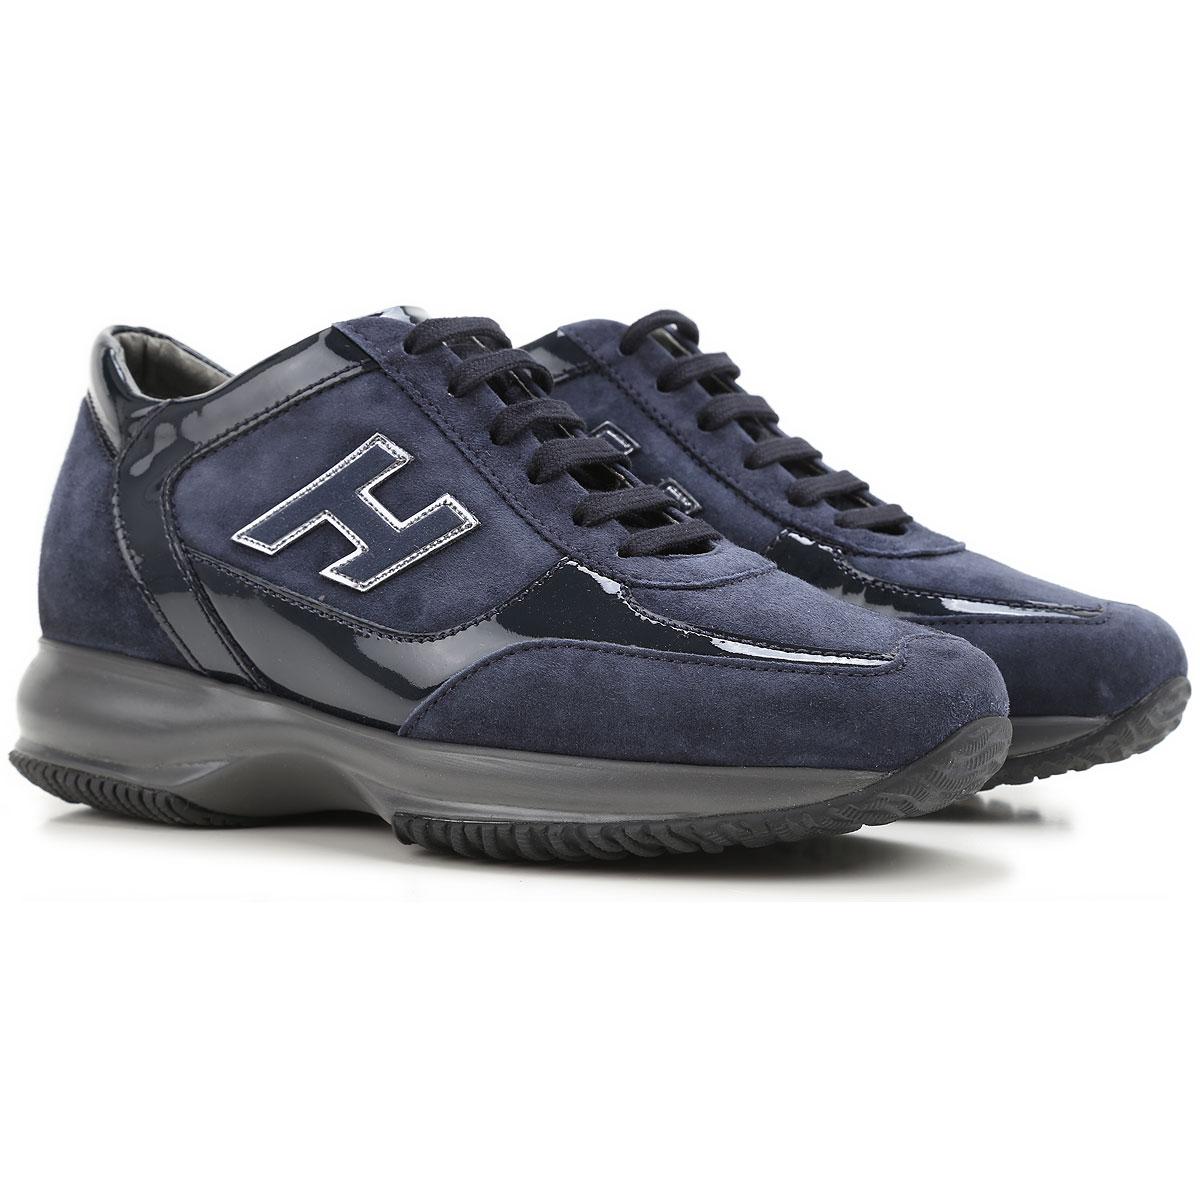 Hogan Leather Sneakers For Women On Sale in Navy (Blue) - Lyst